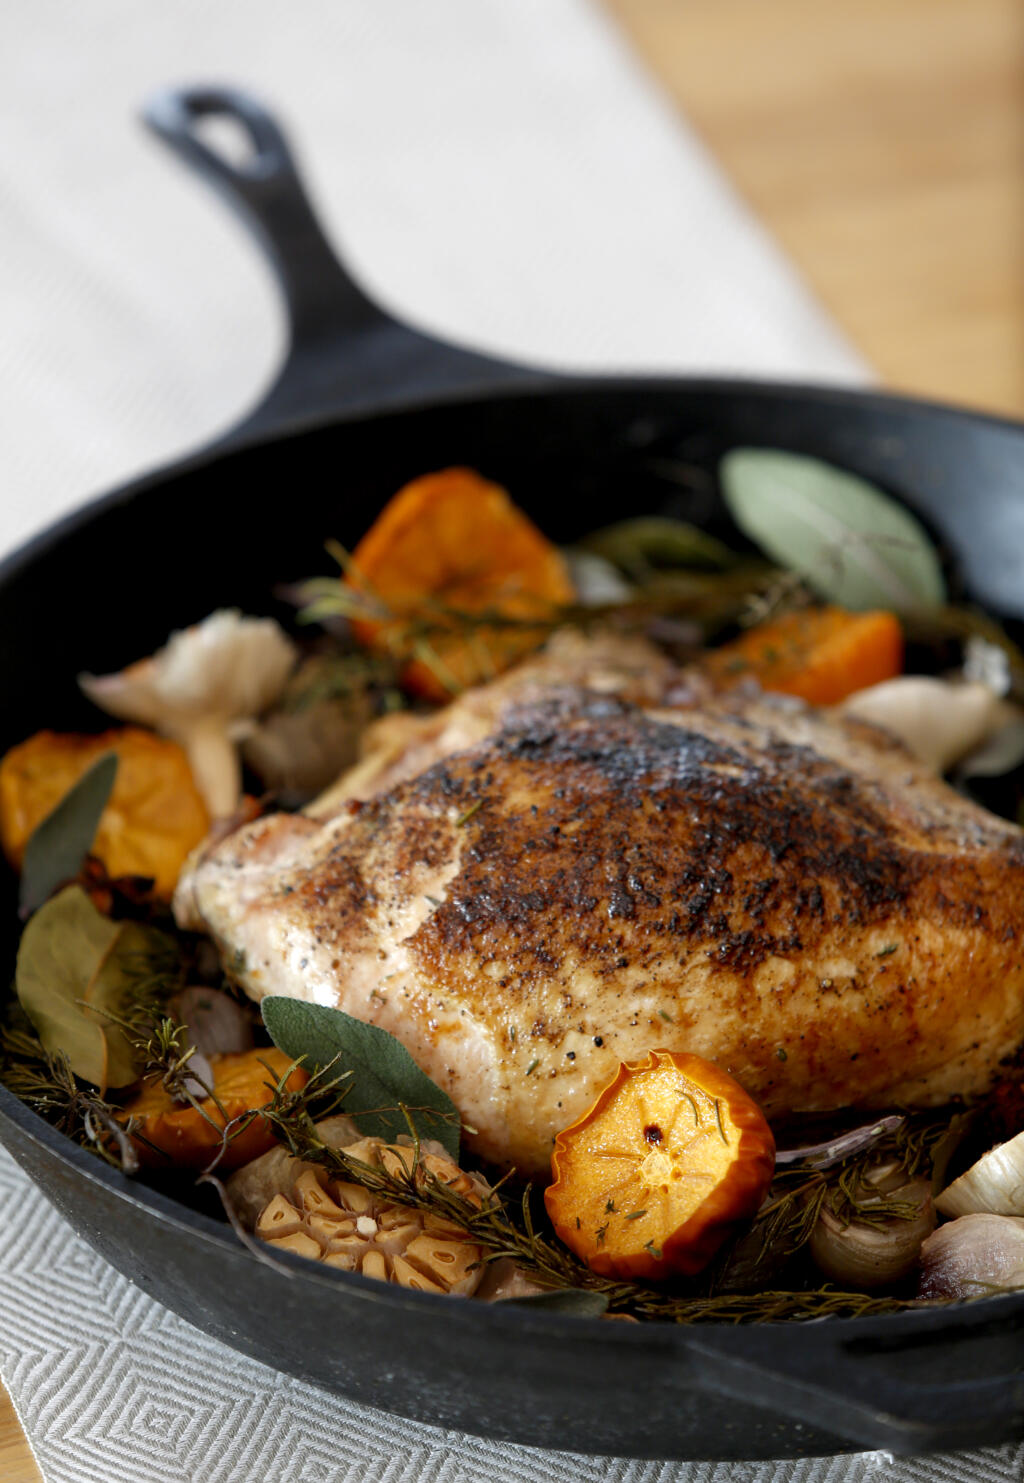 Hassle-free turkey breasts, shown here roasted with aromatics in a skillet, have been popular for Thanksgiving dinner during the pandemic. (Beth Schlanker/ The Press Democrat)